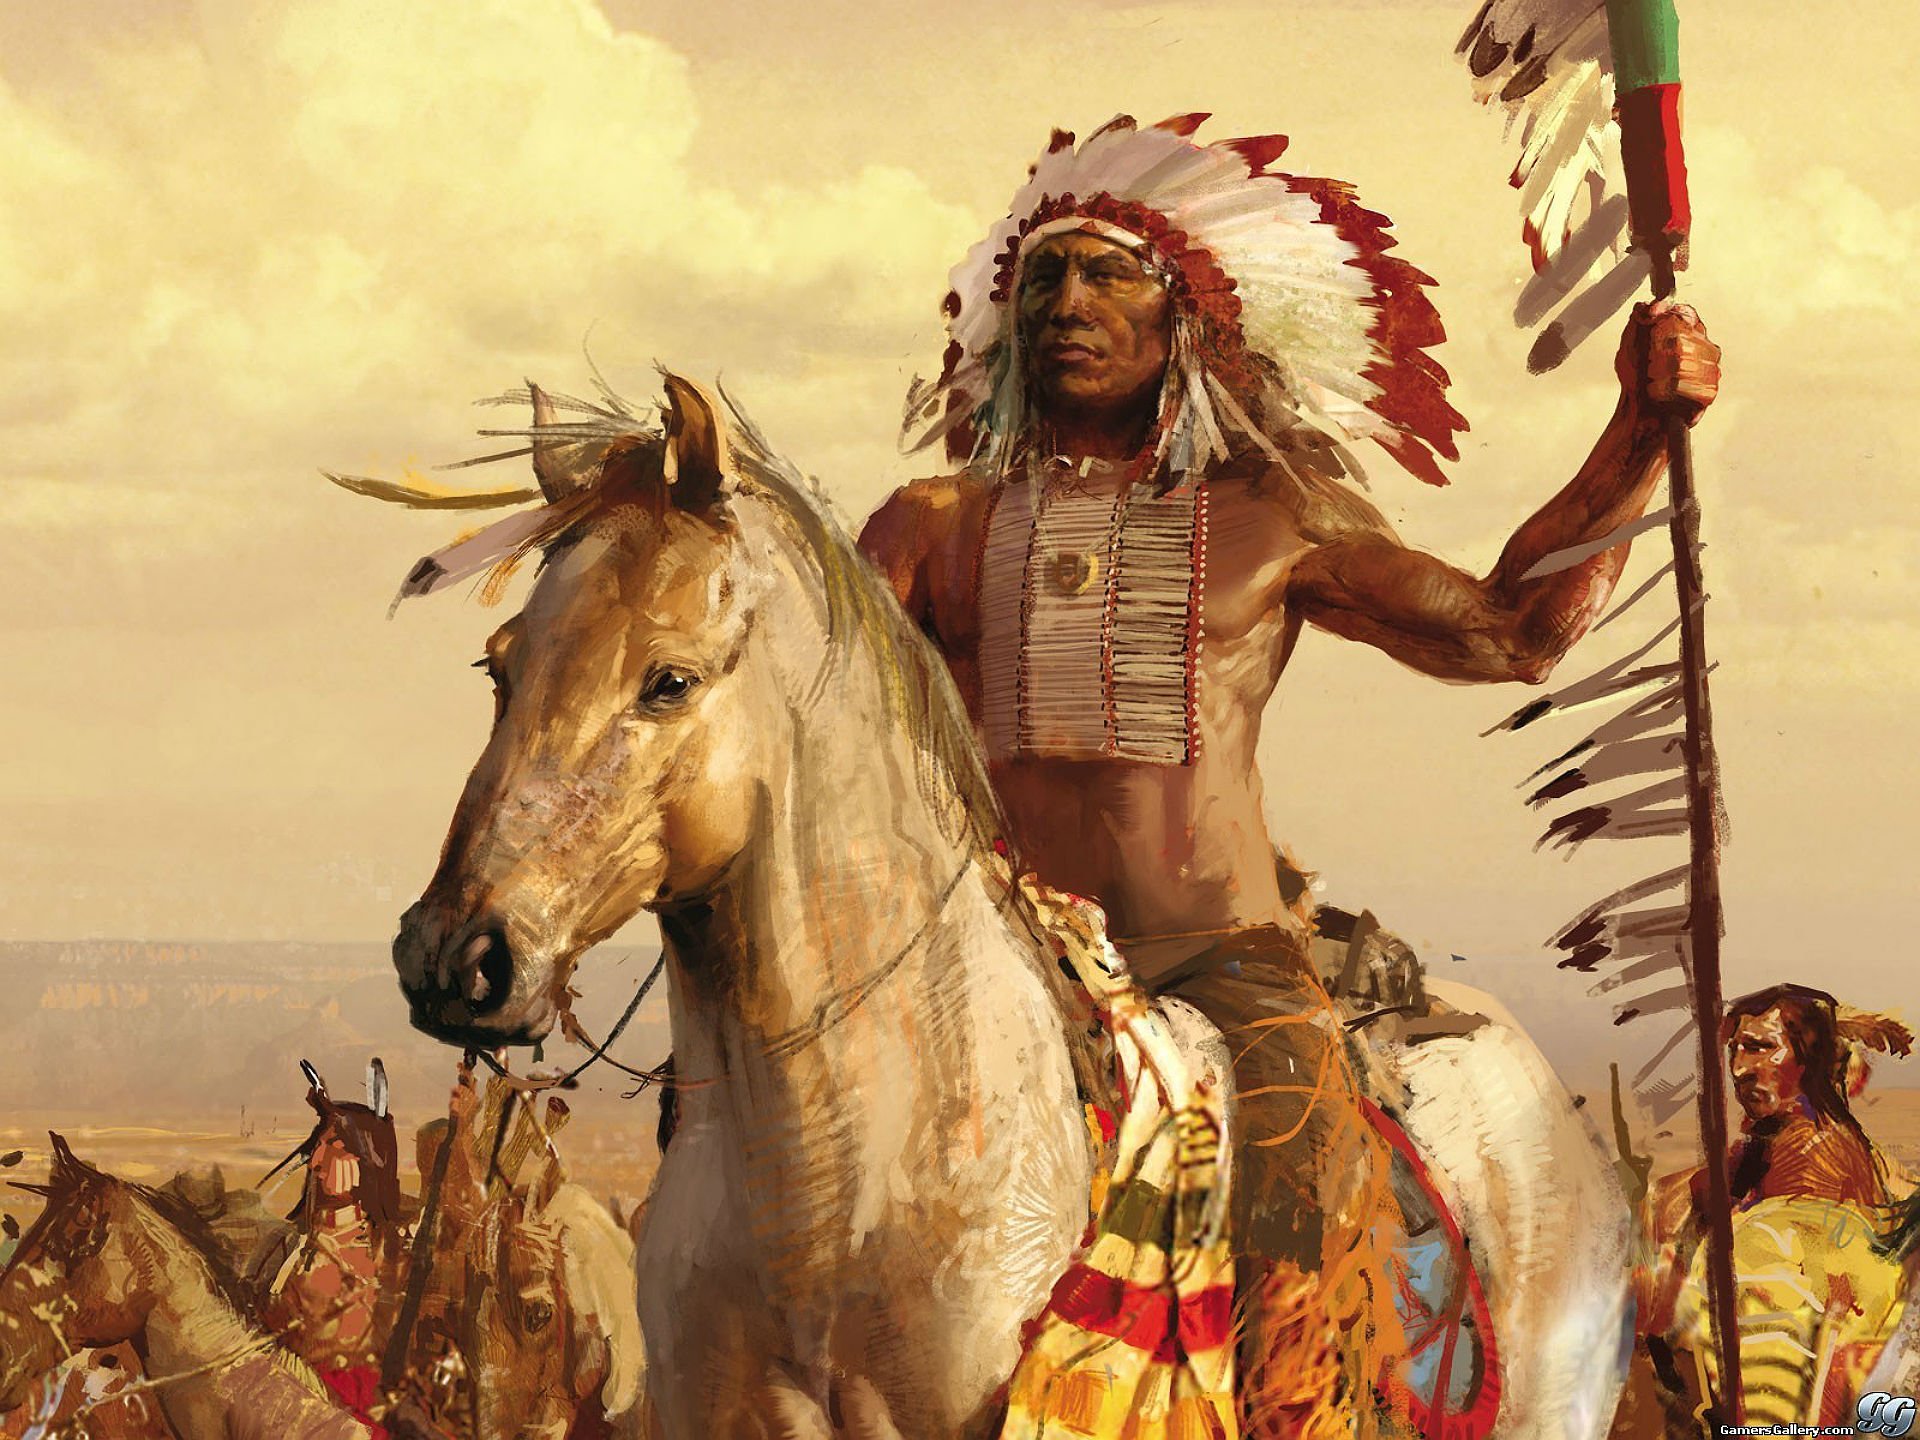 age of empires, Warchiefs, Indian, Native, American, Strategy, Age, Empires, Real time, Western Wallpaper